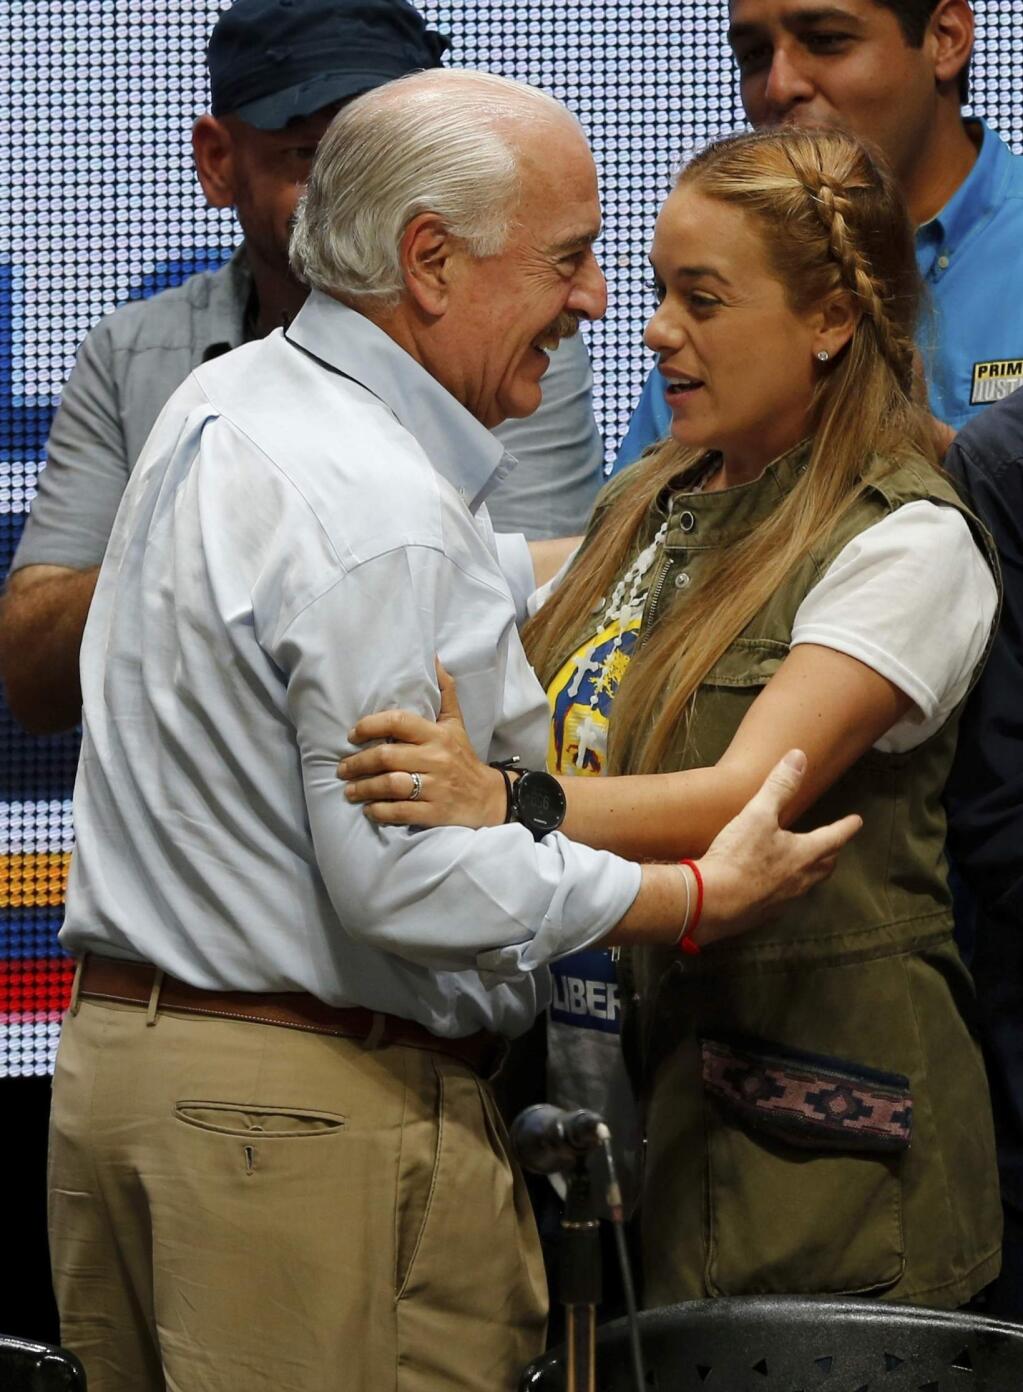 Colombia's former President Andres Pastrana, left, embraces Lilian Tintori, left after a news conference of international observers of a symbolic referendum in Caracas, Venezuela, Sunday, July 16, 2017. Hundreds of thousands of Venezuelans lined up across the country and in expatriate communities around the world Sunday to vote in a symbolic rejection of President Nicolas Maduro's plan to rewrite the constitution, a proposal that's raising tensions in a nation battered by shortages and anti-government protests. (AP Photo/Ariana Cubillos)